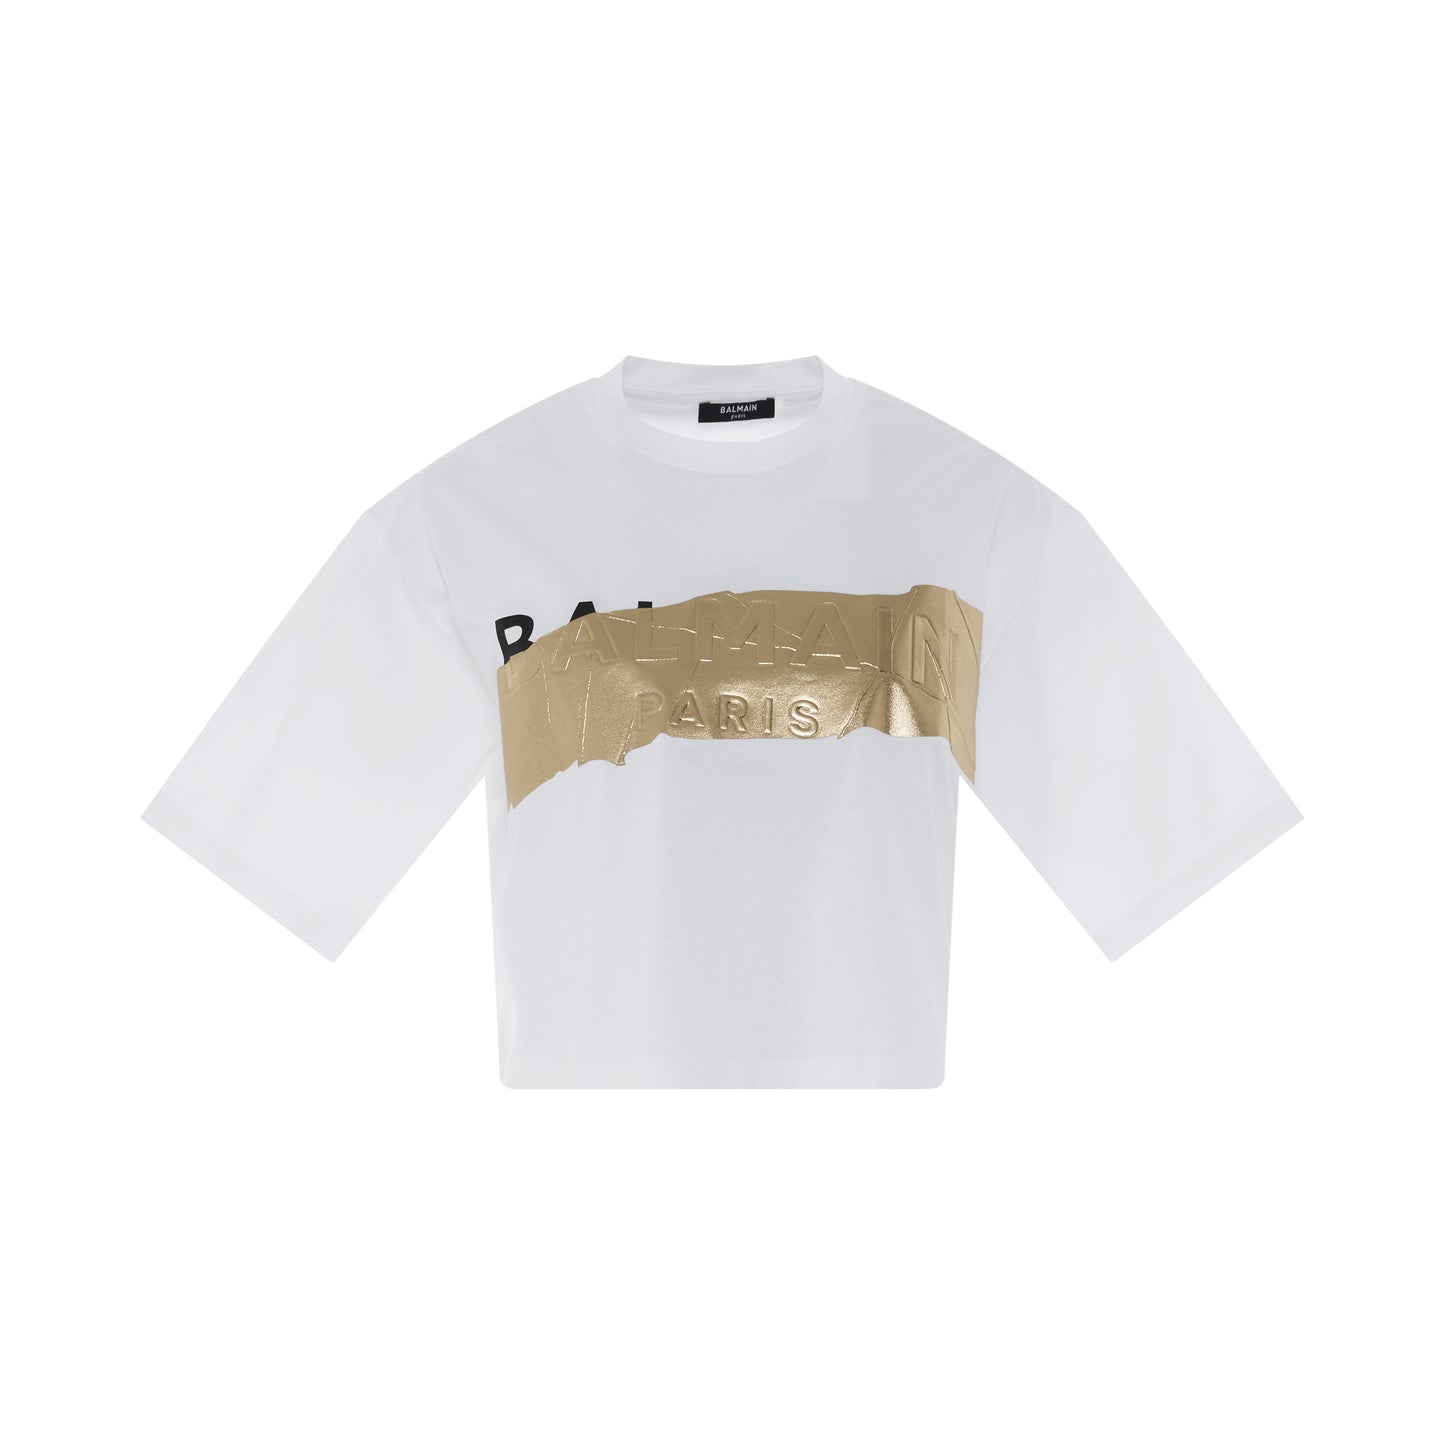 Gold Tape Cropped Short Sleeve T-Shirt in White/Gold